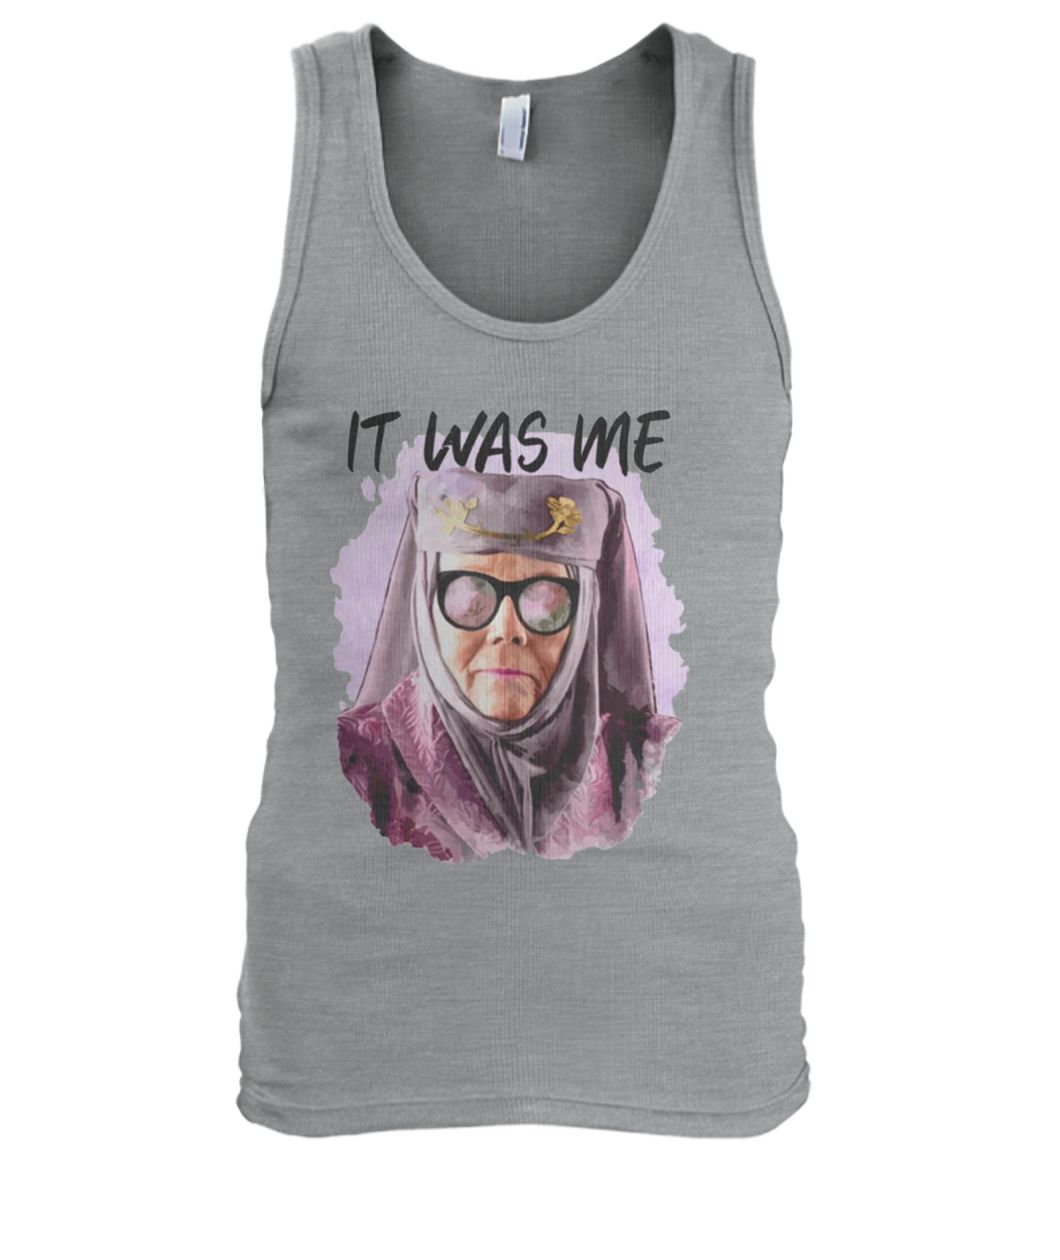 Olenna tyrell tell cersei it was me game of thrones men's tank top